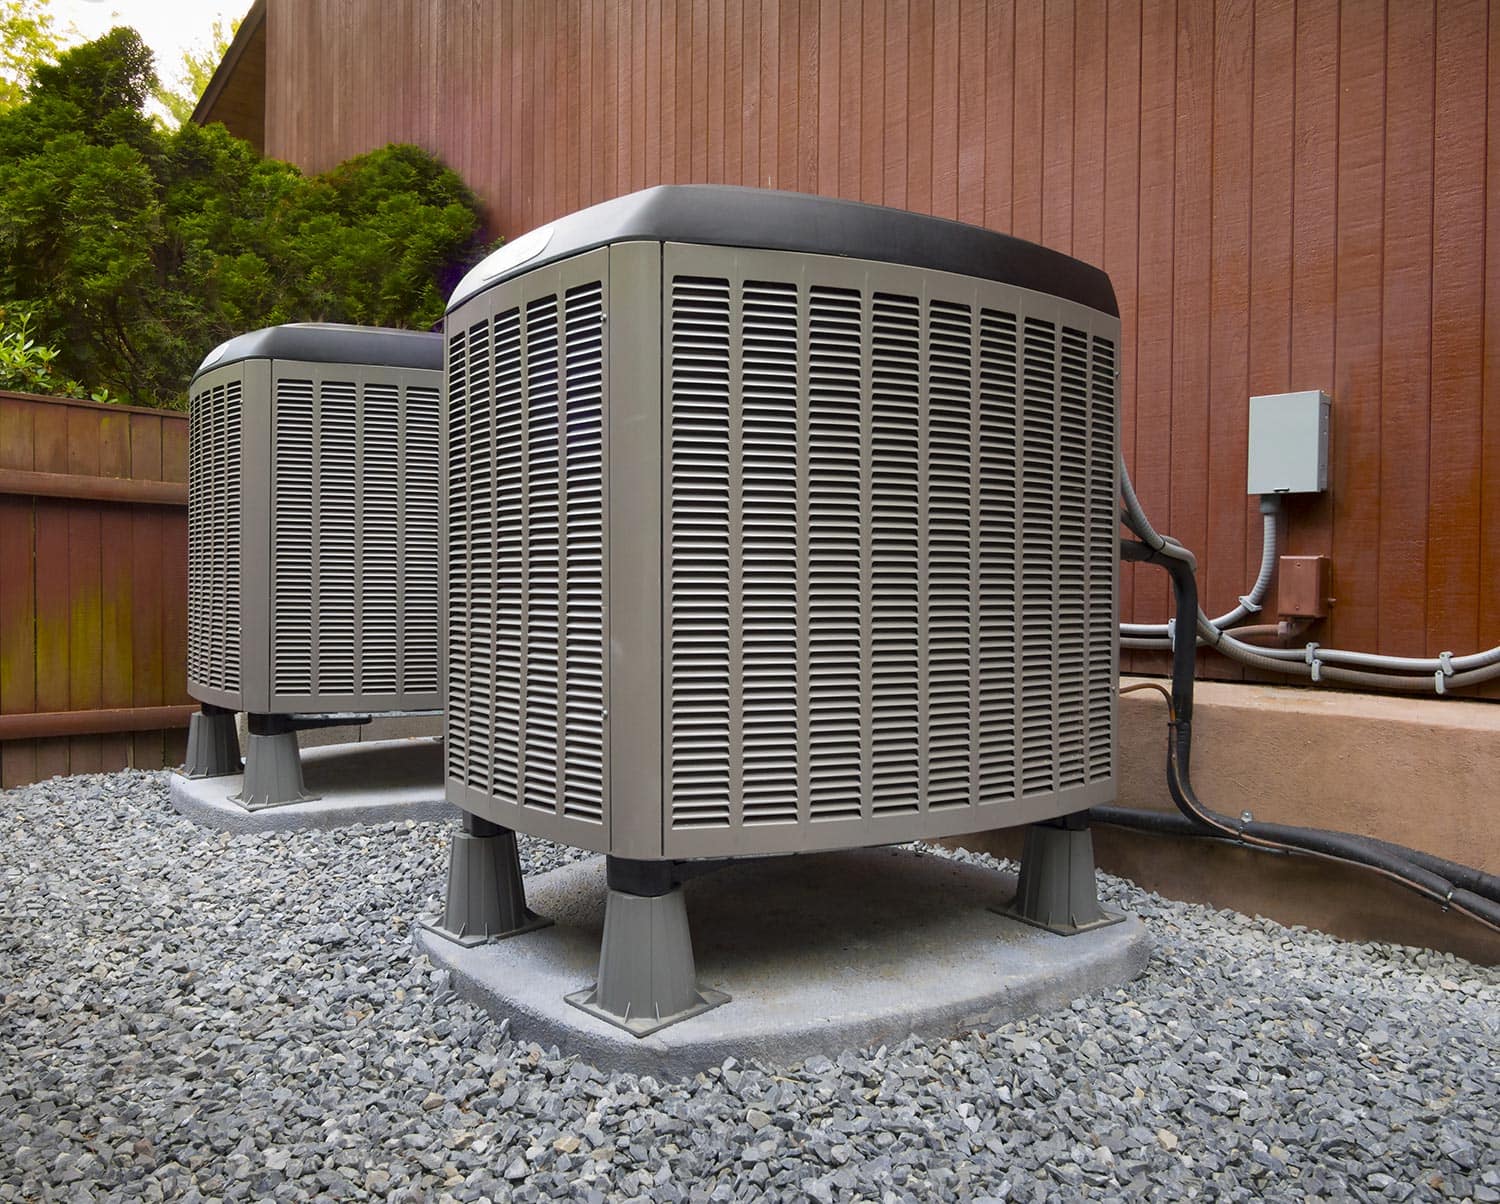 Heat pump system outside the house